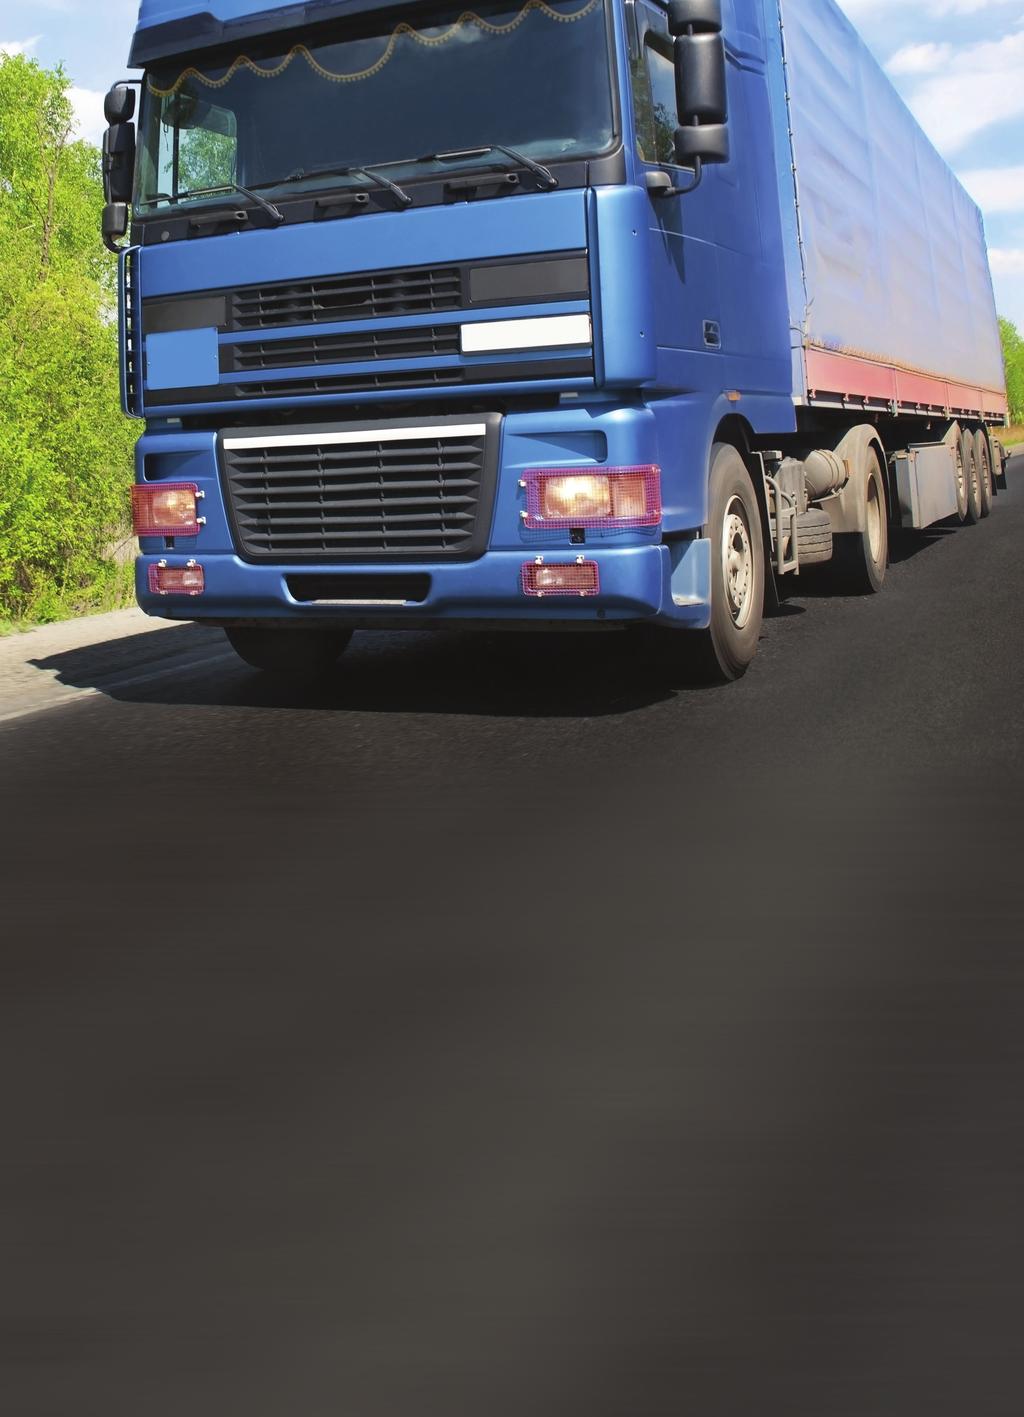 HGV MOTOR ASSISTANCE GOLD THIS IS